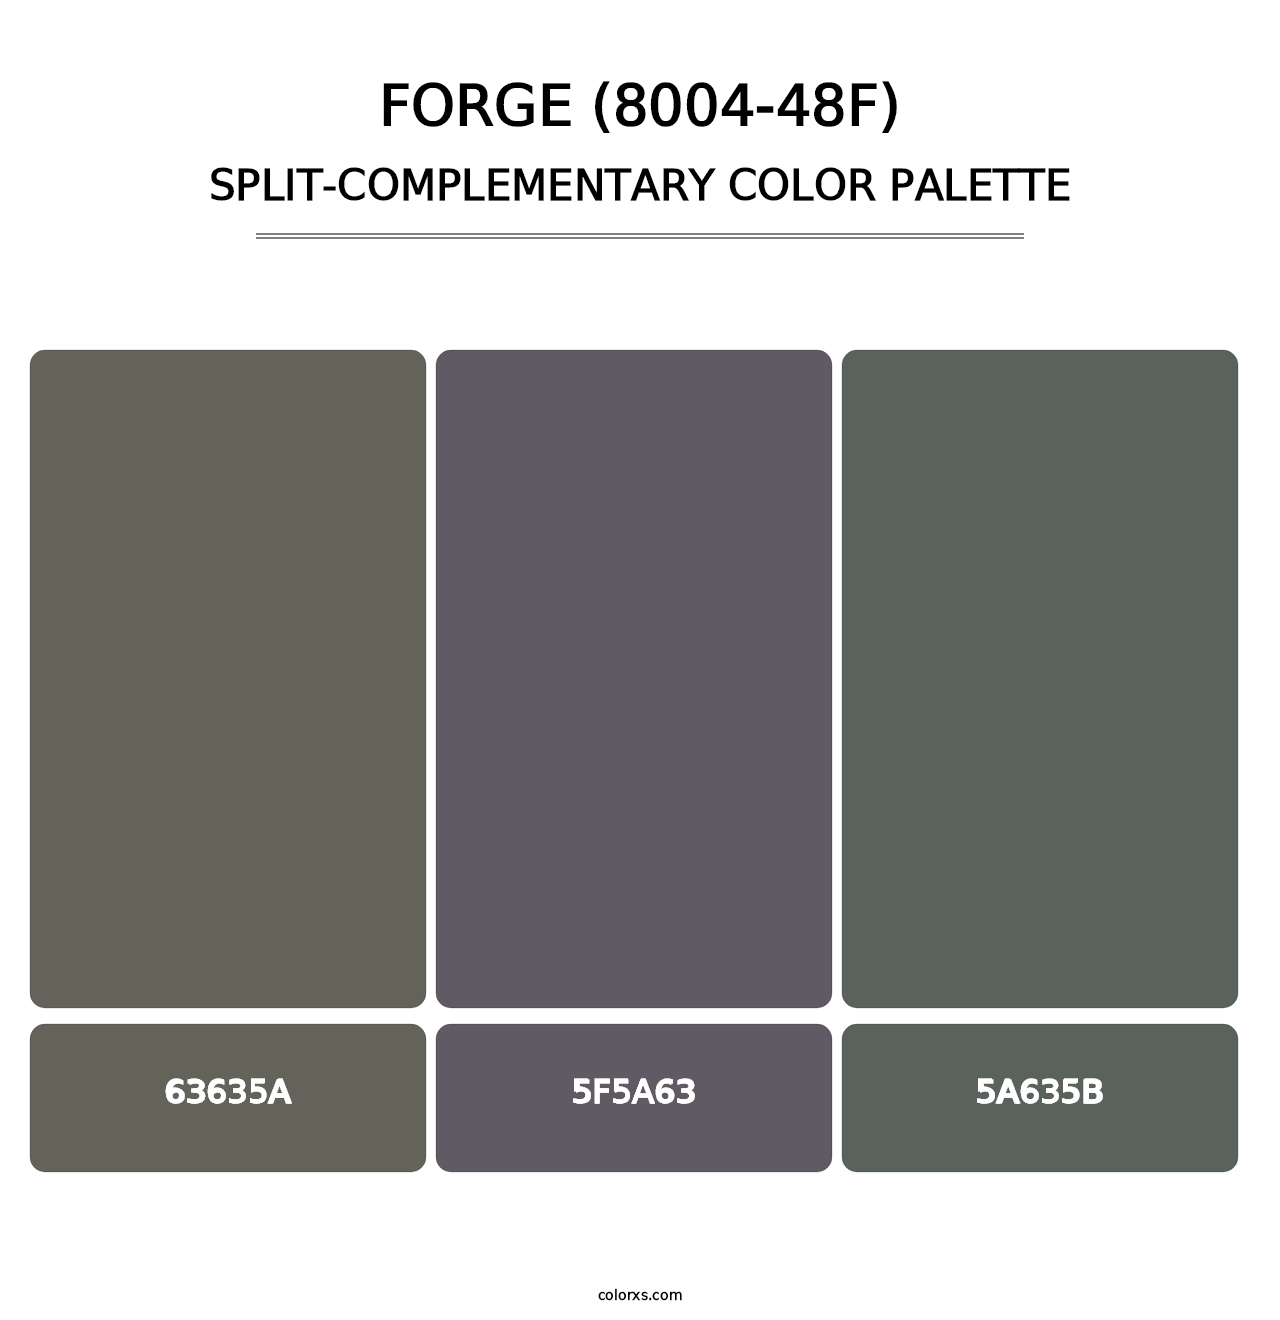 Forge (8004-48F) - Split-Complementary Color Palette